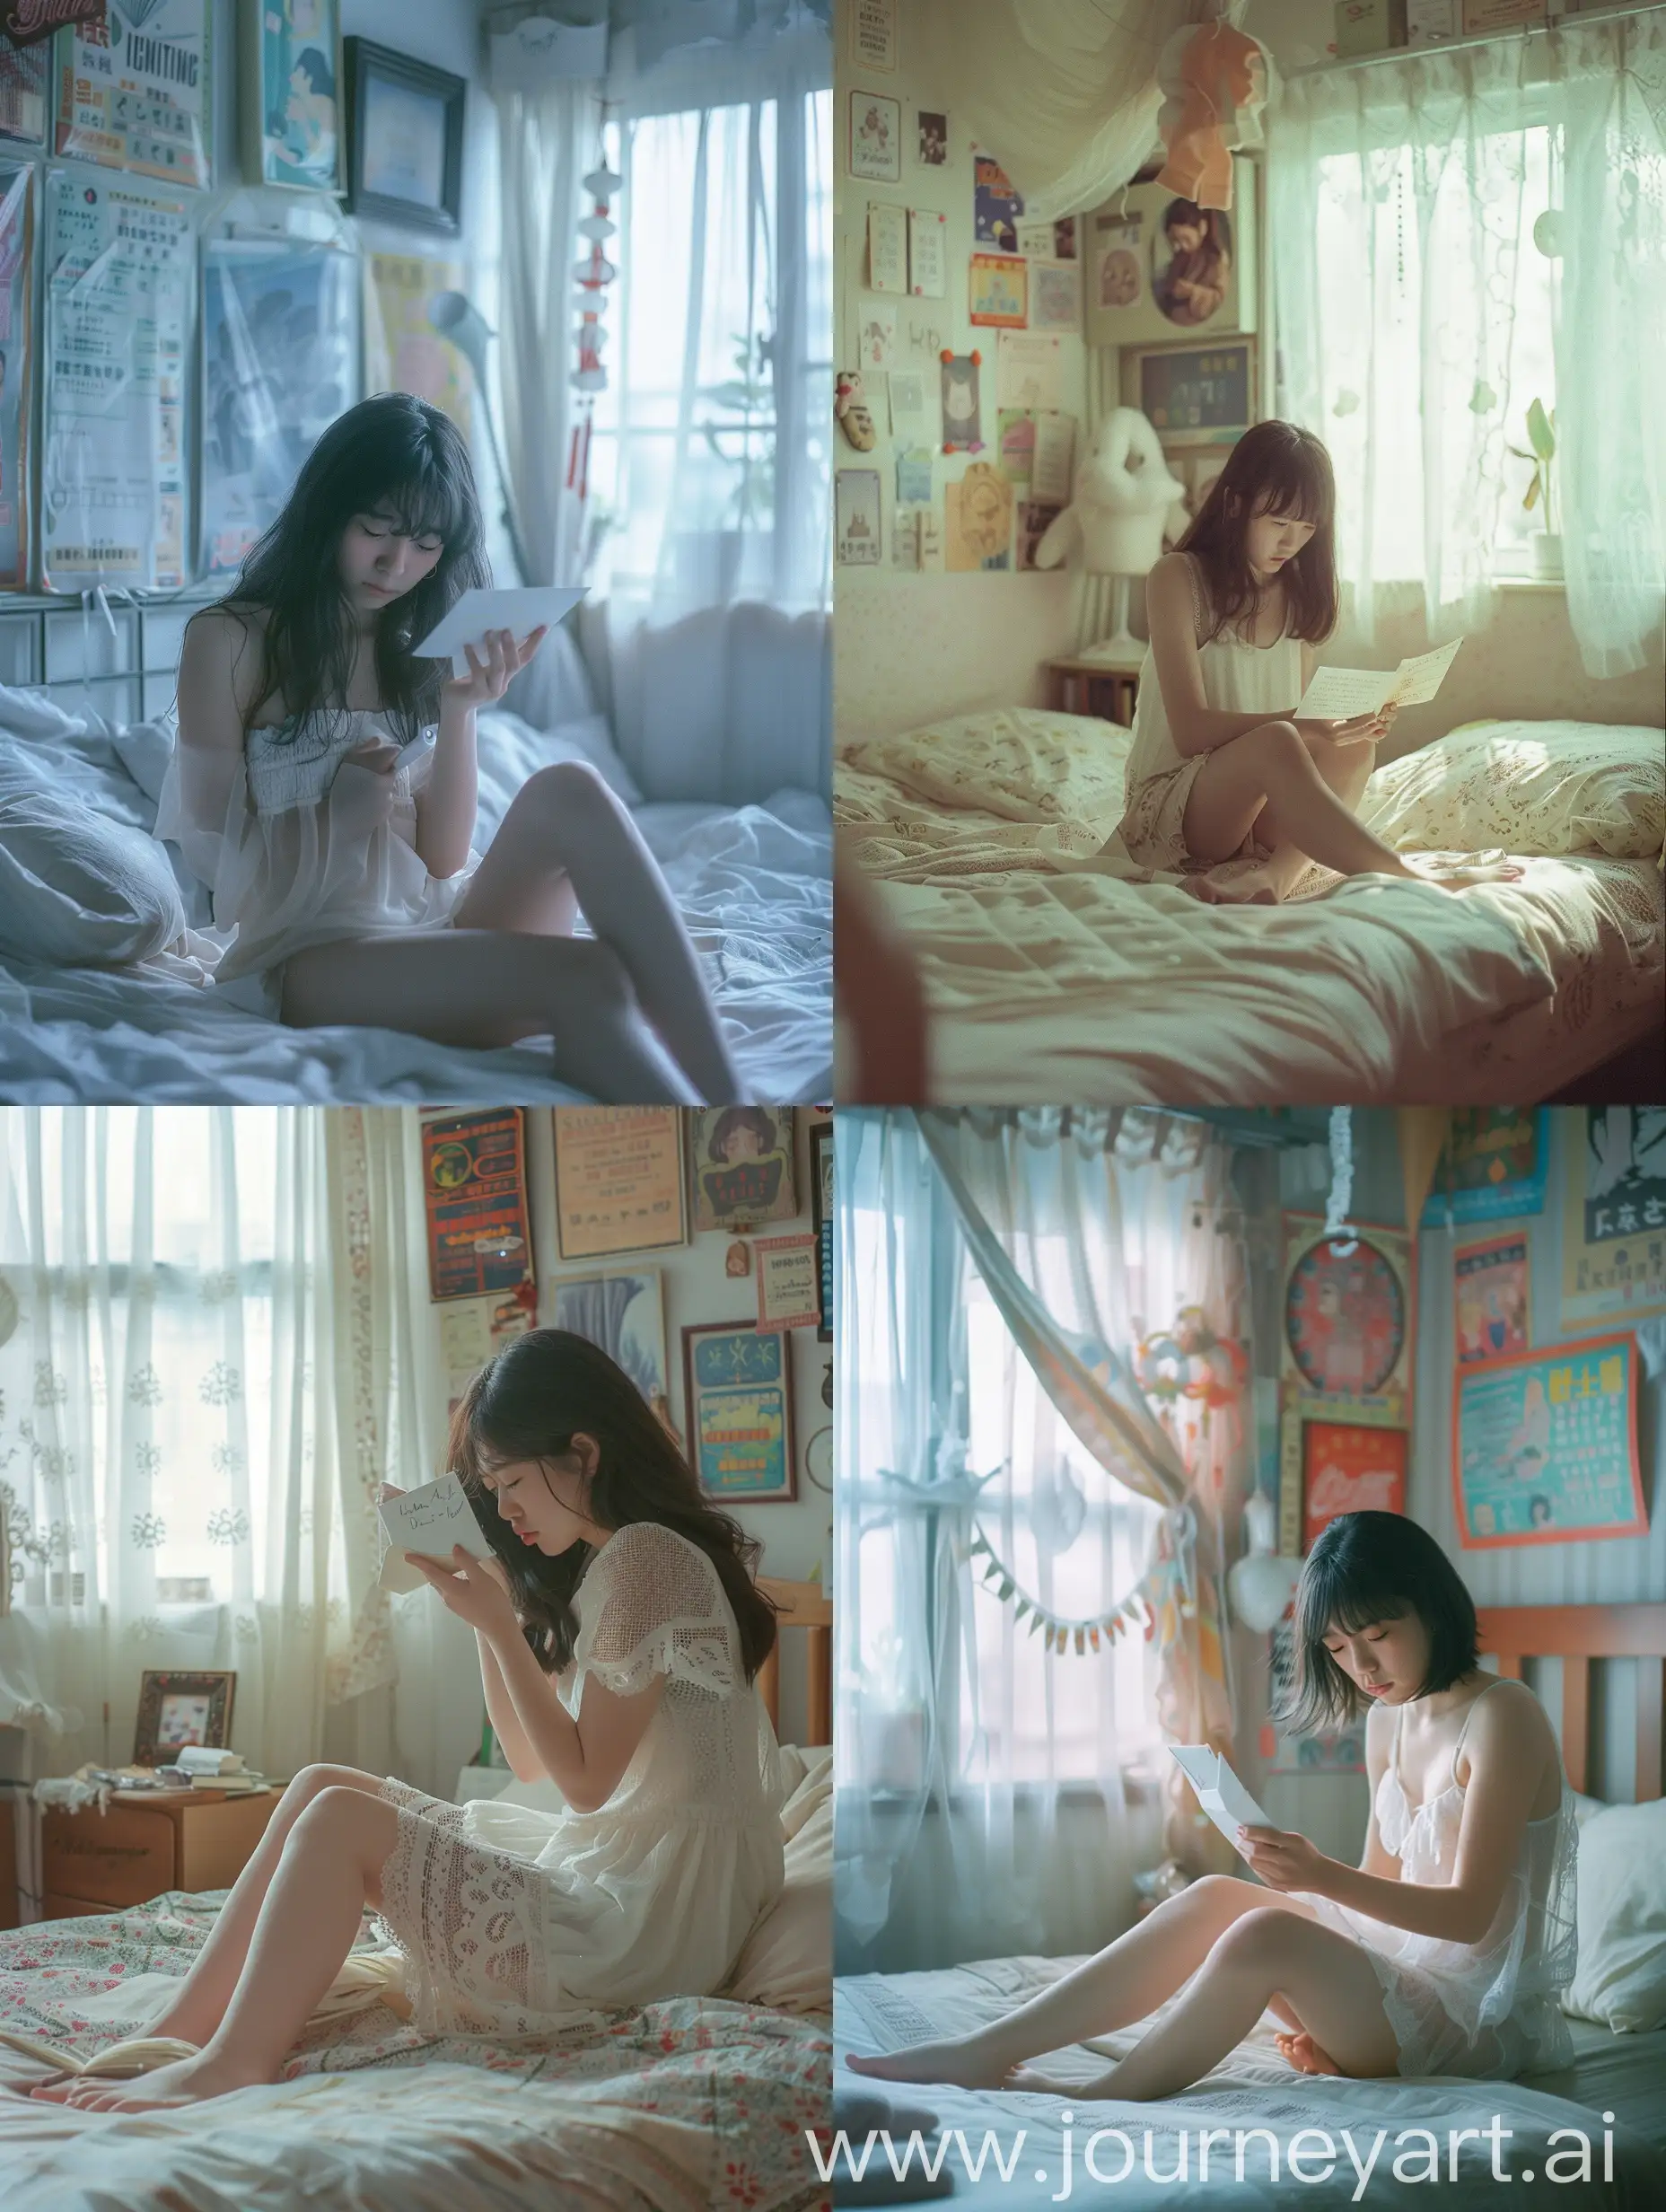 Asian girl sitting on bed, she is sad, reading letter in her hand, nostalgic room with posters and decorations, soft color tone, soft natural light through sheer curtains, using a kodak film, vinatage style 
